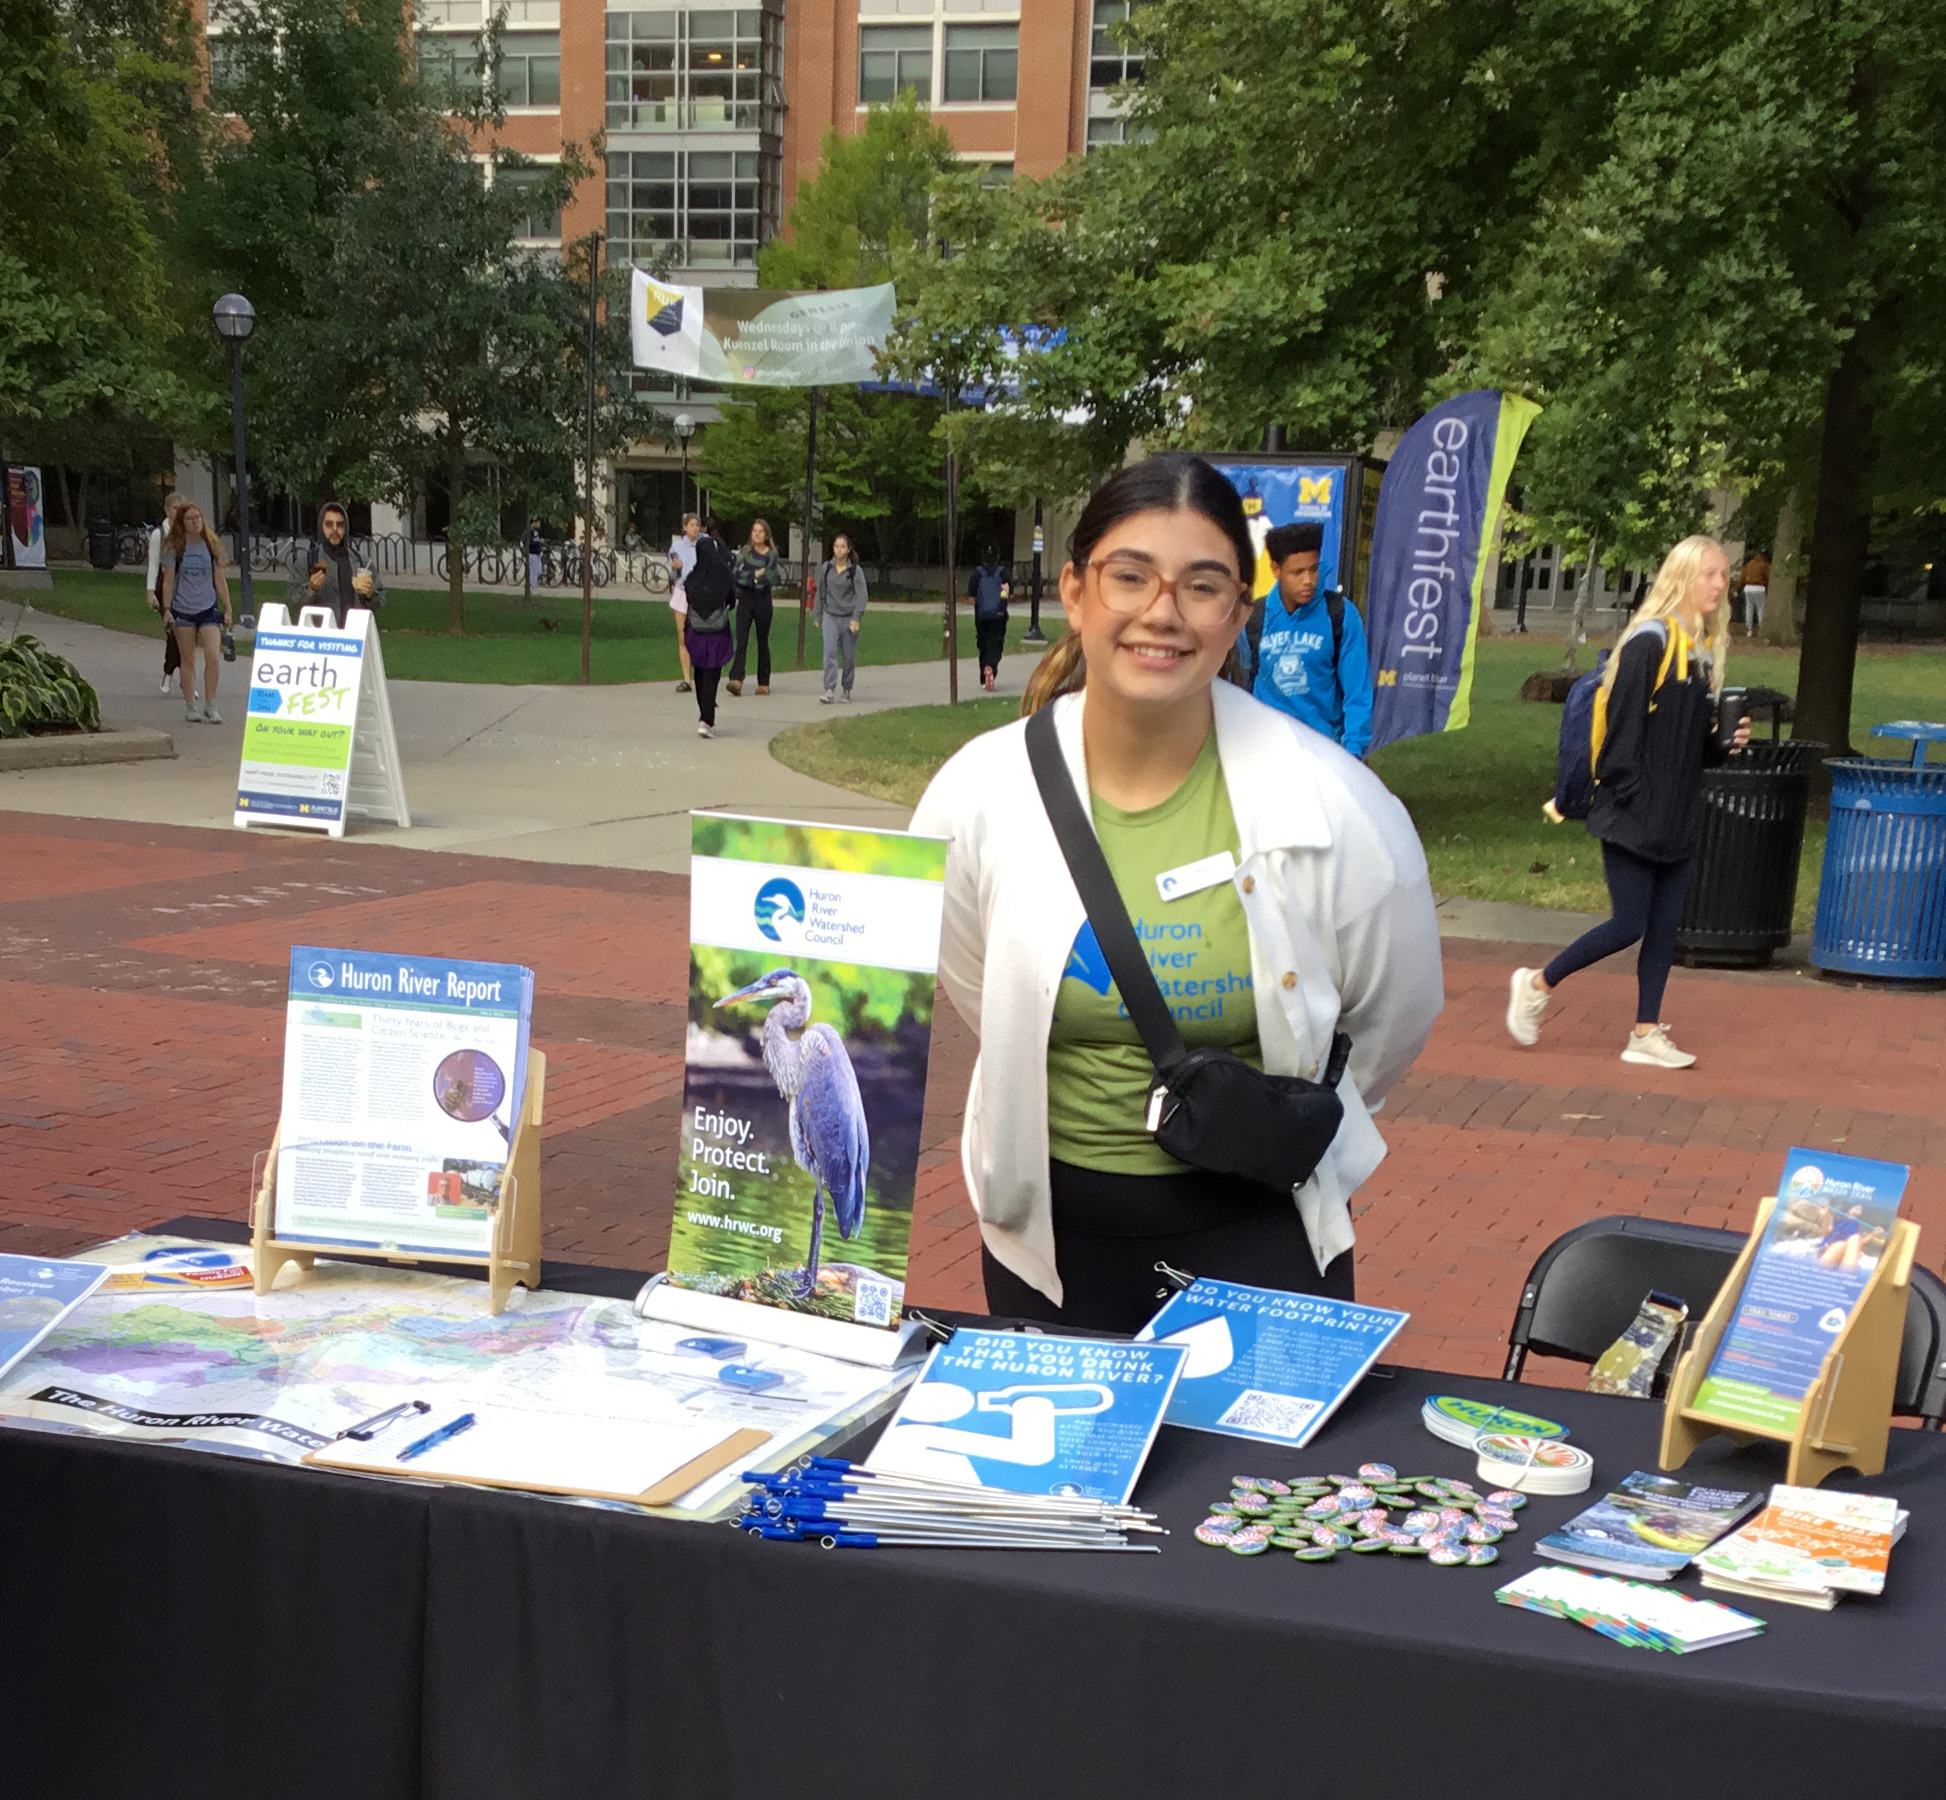 Volunteer at Earthfest table handing out literature on the diag.